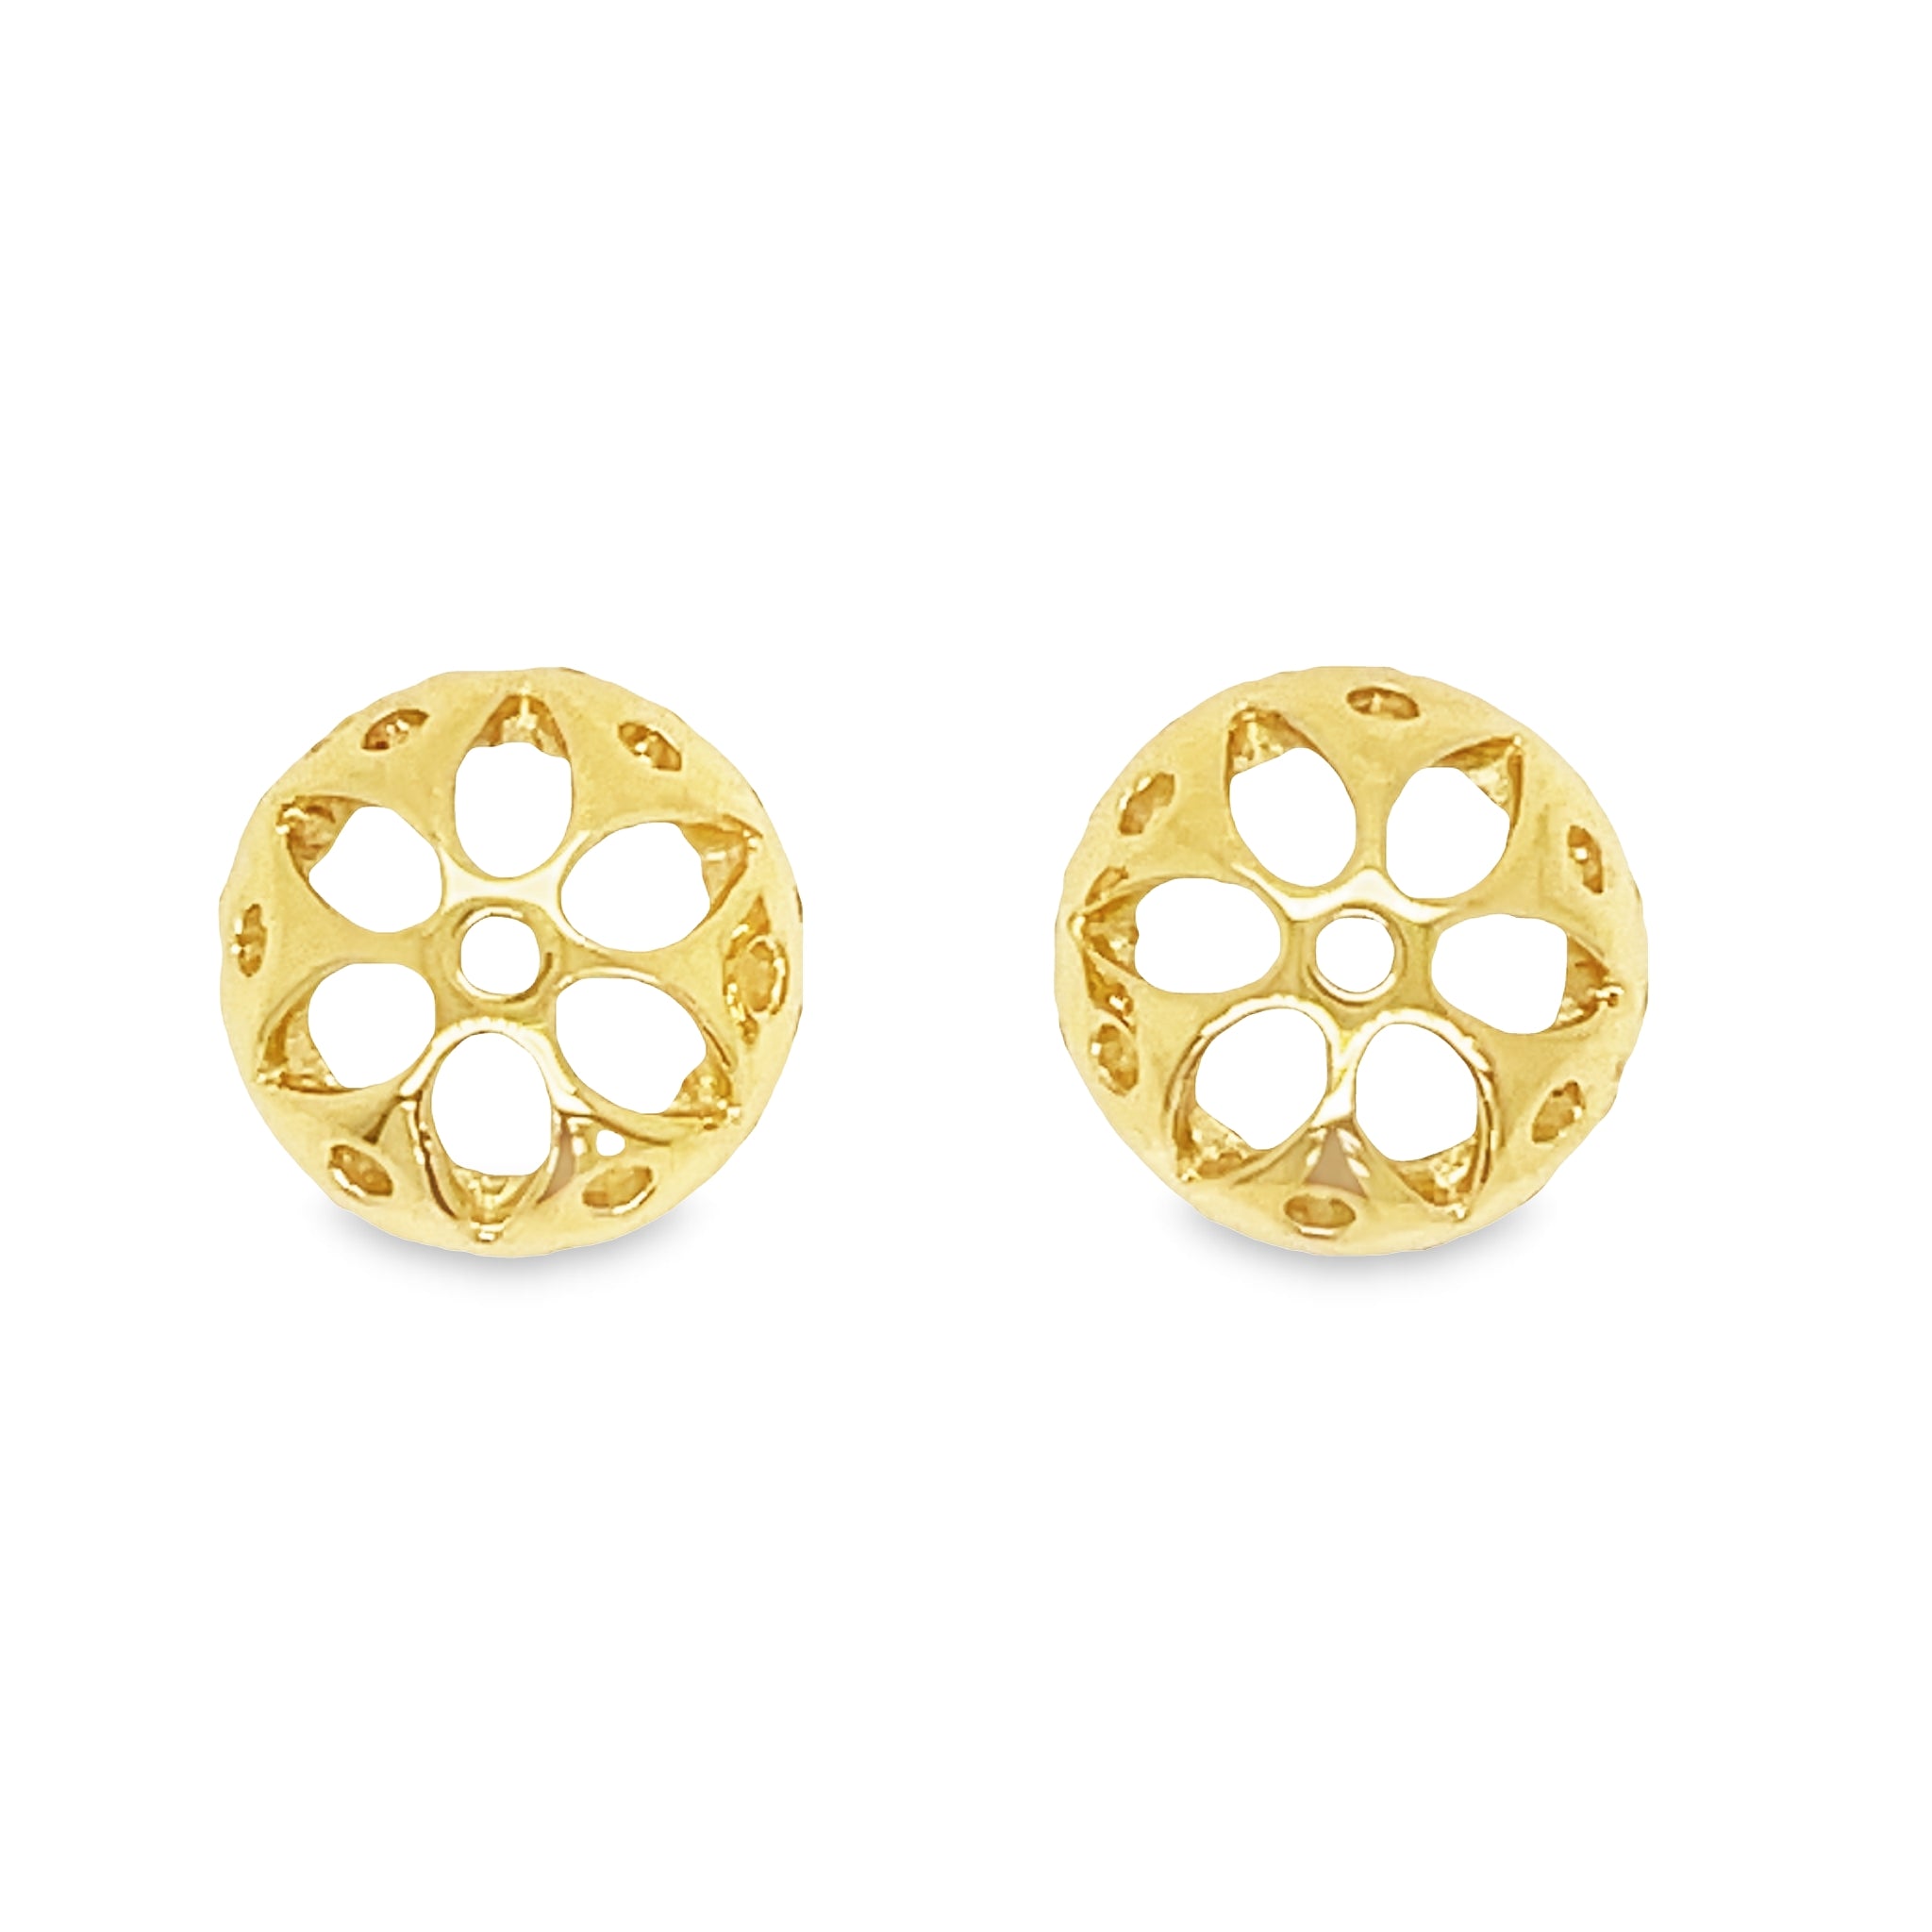 Let your sparkle shine with these stunning Small Removable Round Diamond Jacket Earrings! Crafted of 18k yellow gold, these earrings feature round diamonds 0.34 cts that will have you dazzling. Show off the ultimate in classic beauty and elegance!  Diamond studs not included 